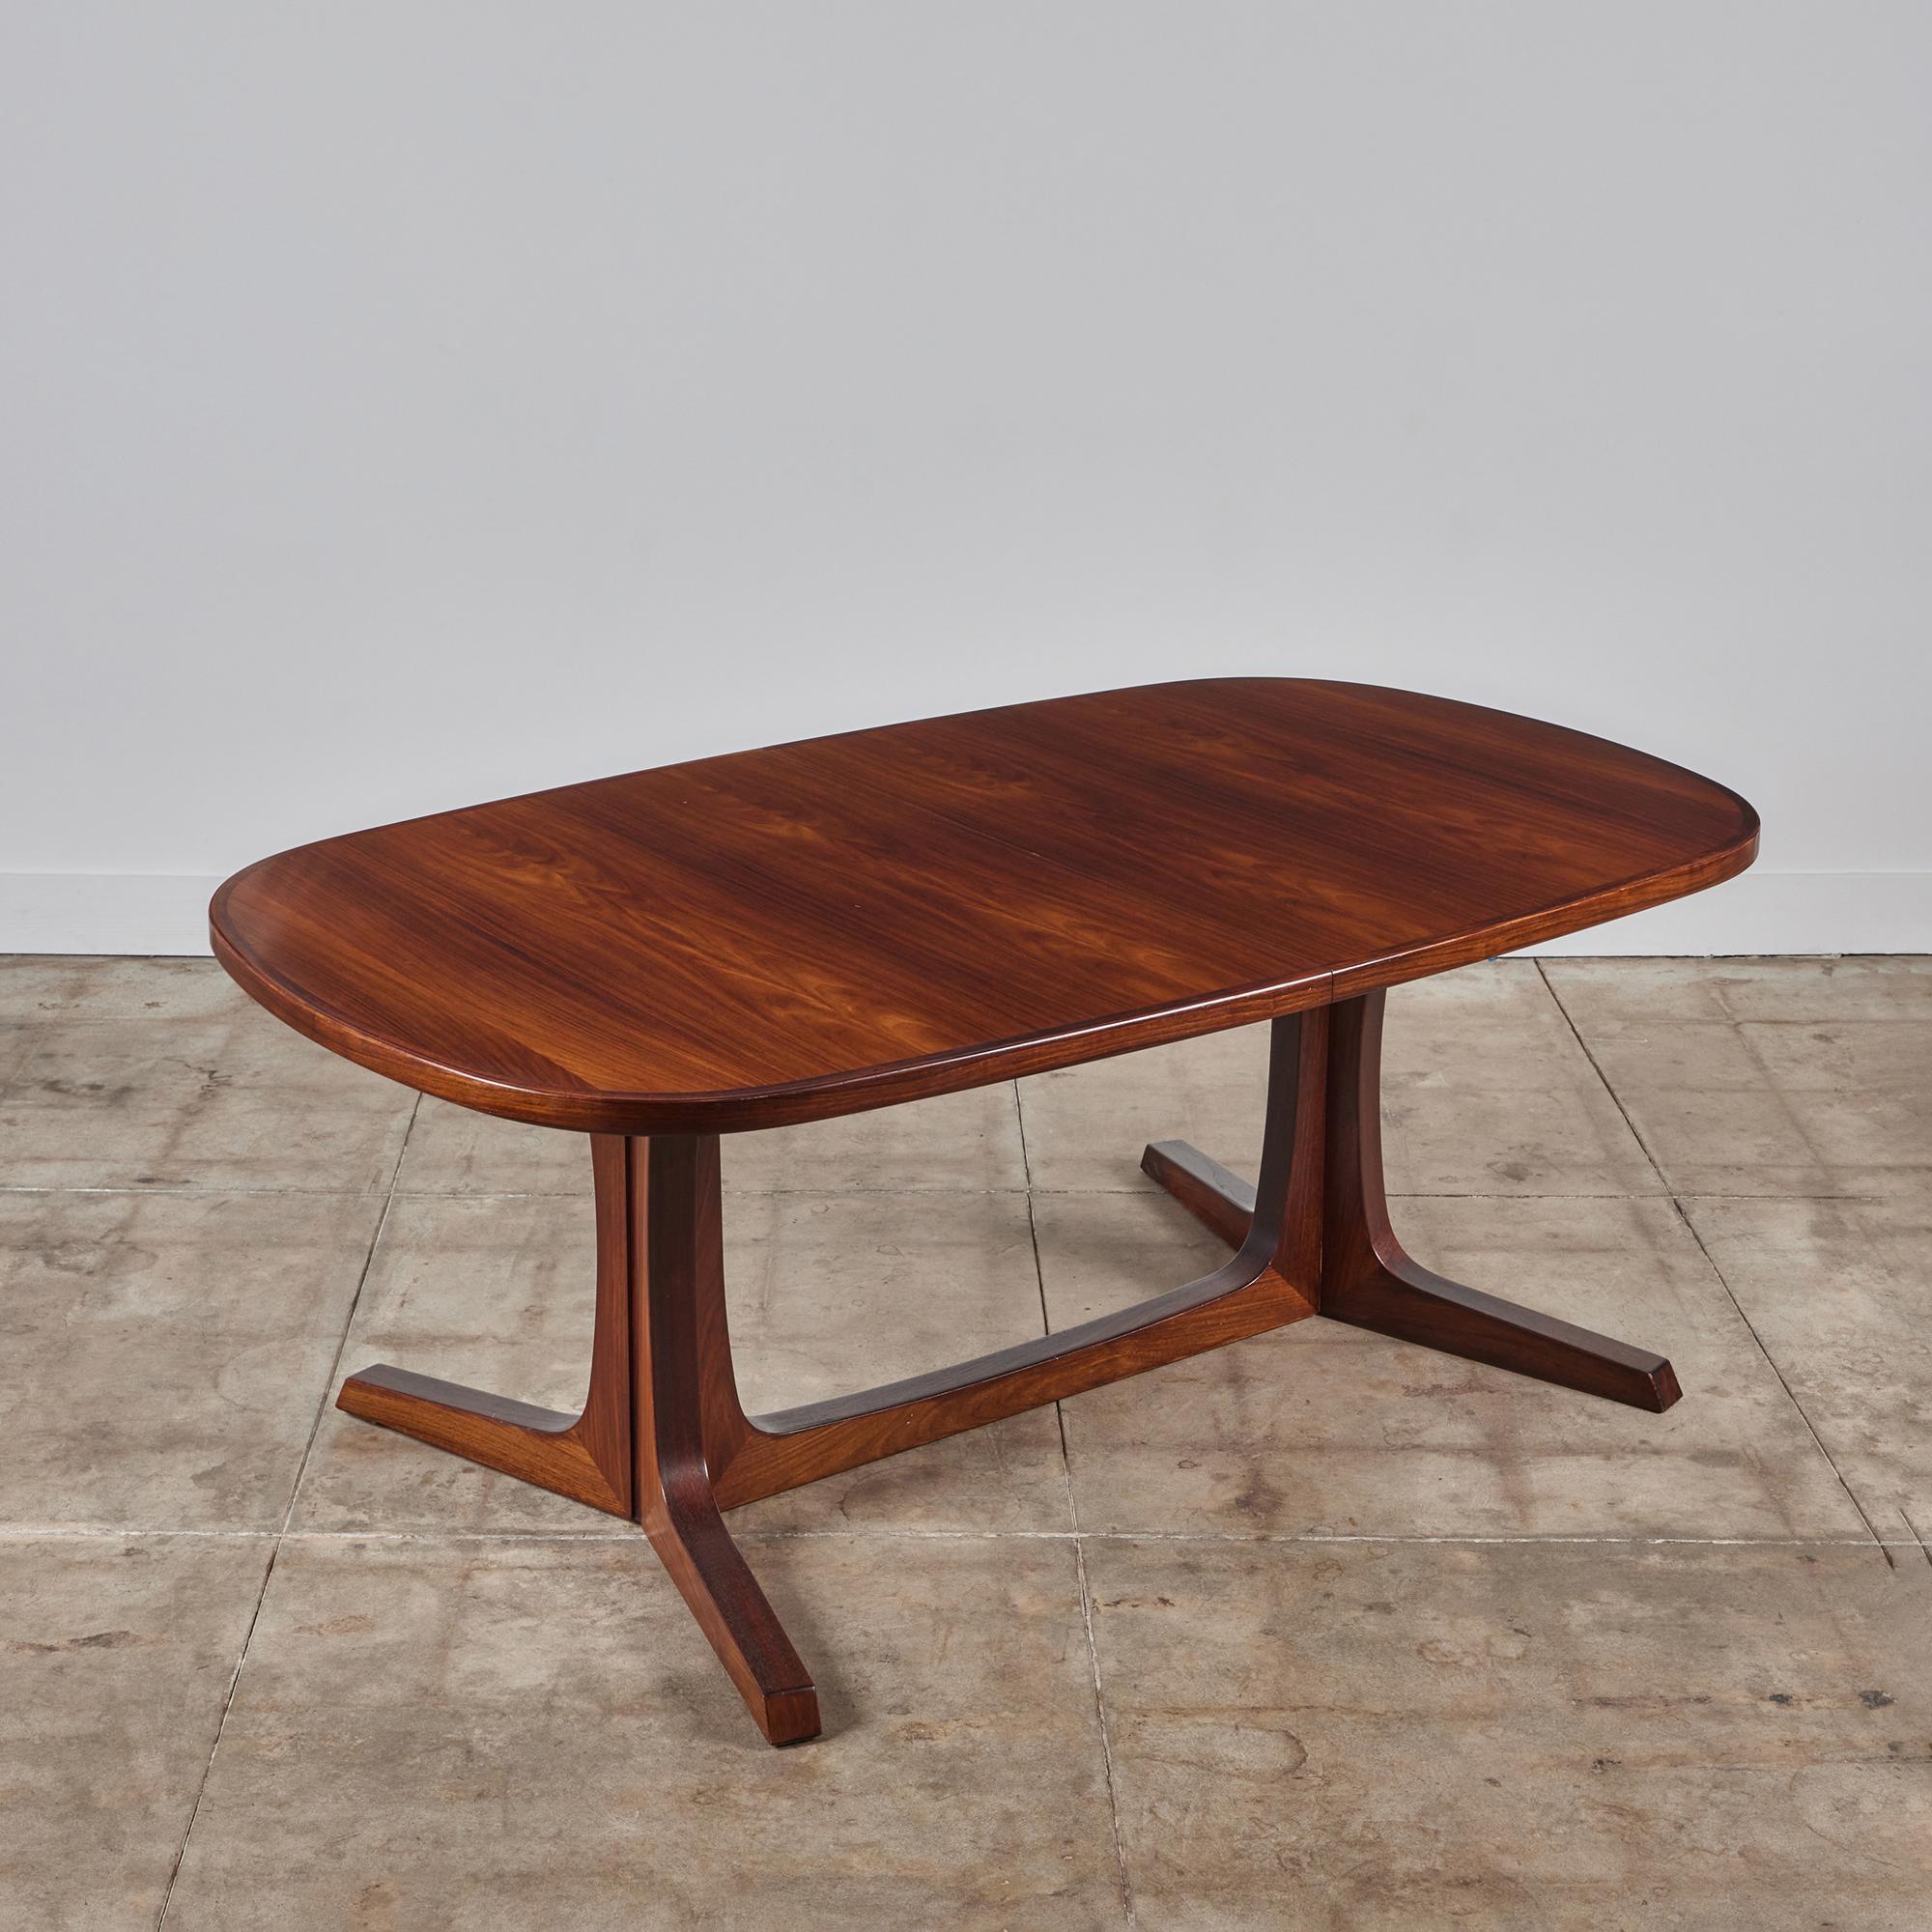 Niels Møller dining table for Gudme Møbelfabrik c.1960s, Denmark. The table features a rectangular table top with rounded edges and two leaves that transform it to 113